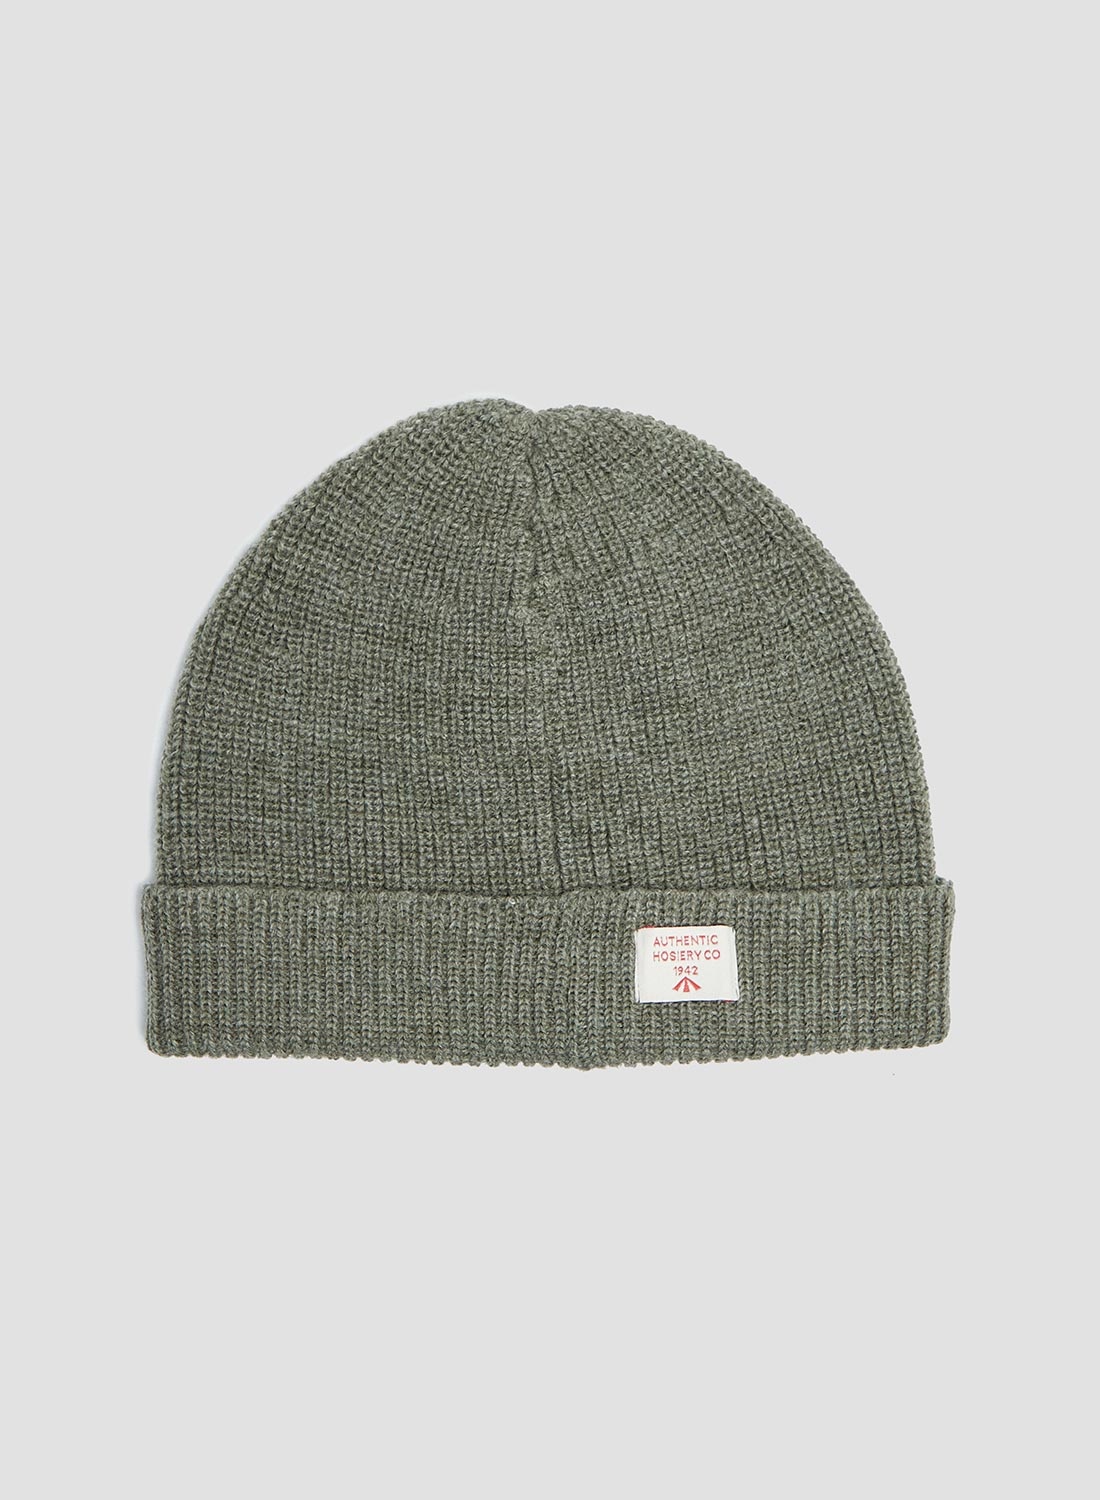 Solid Beanie in Army - 1